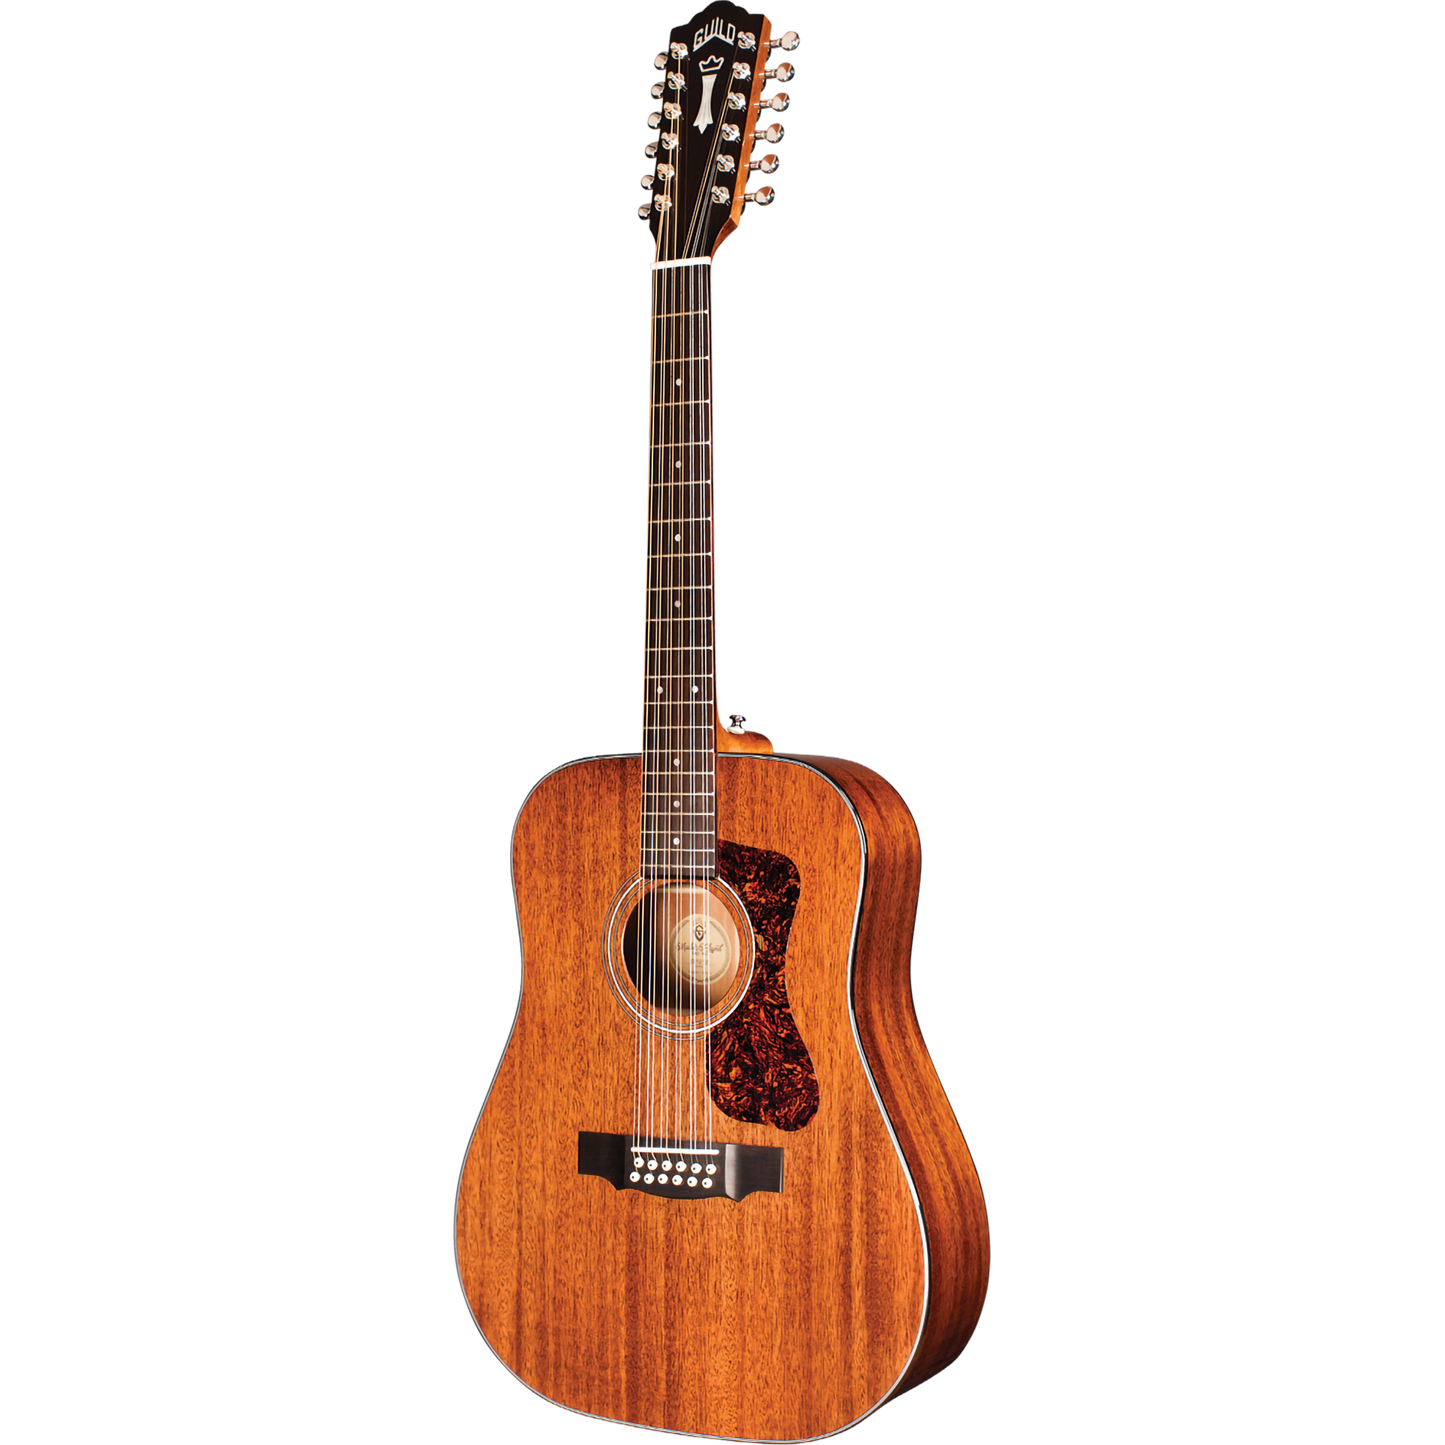 Guild Westerly Collection D-1212 Solid 12-String Dreadnought Acoustic Guitar